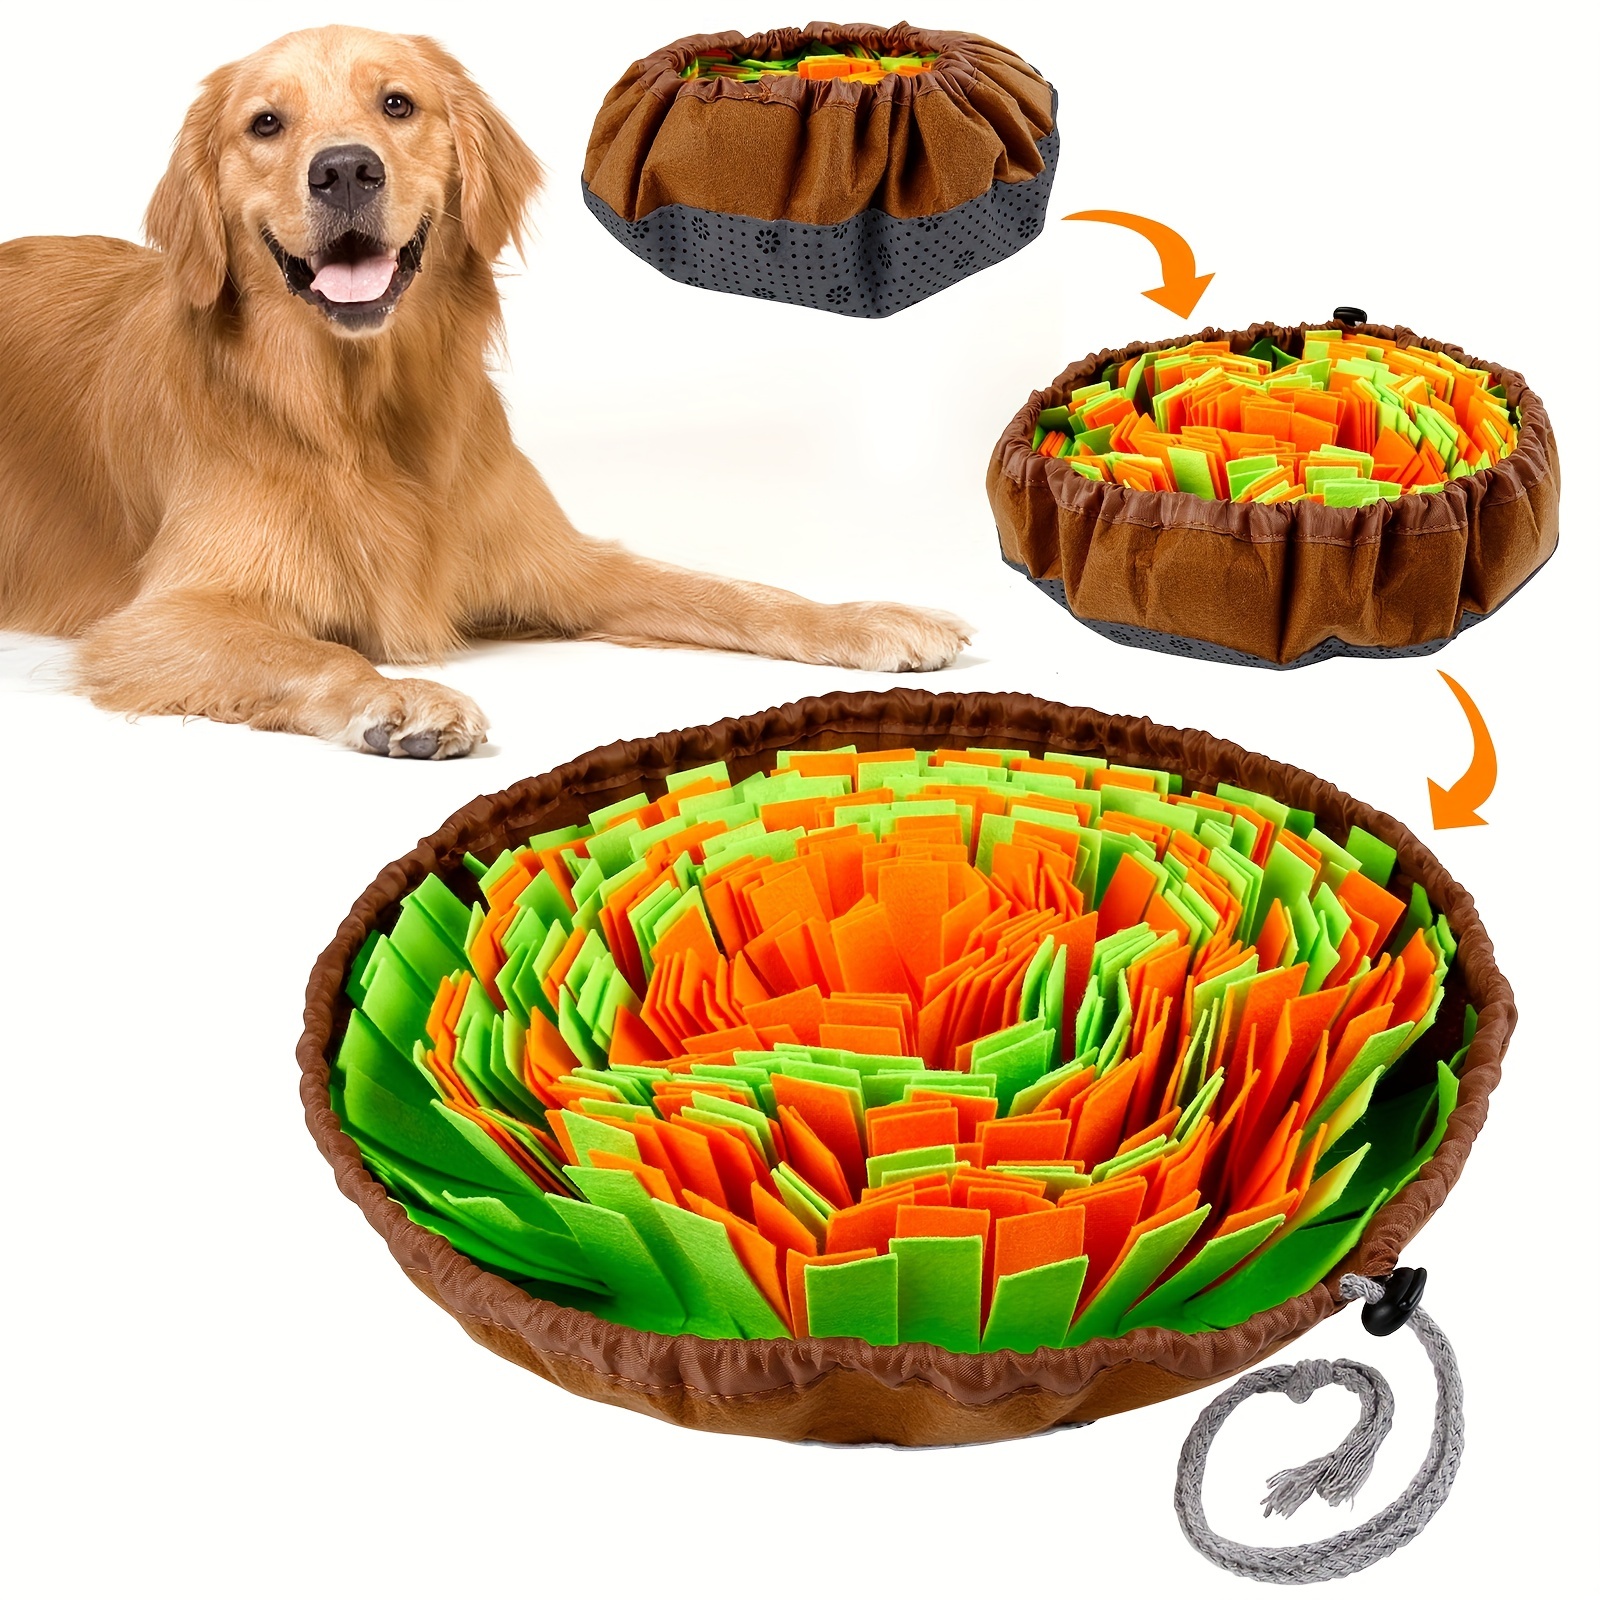 Puzzle Slow Feeder Dogs, Interactive Bowl Dog Slow